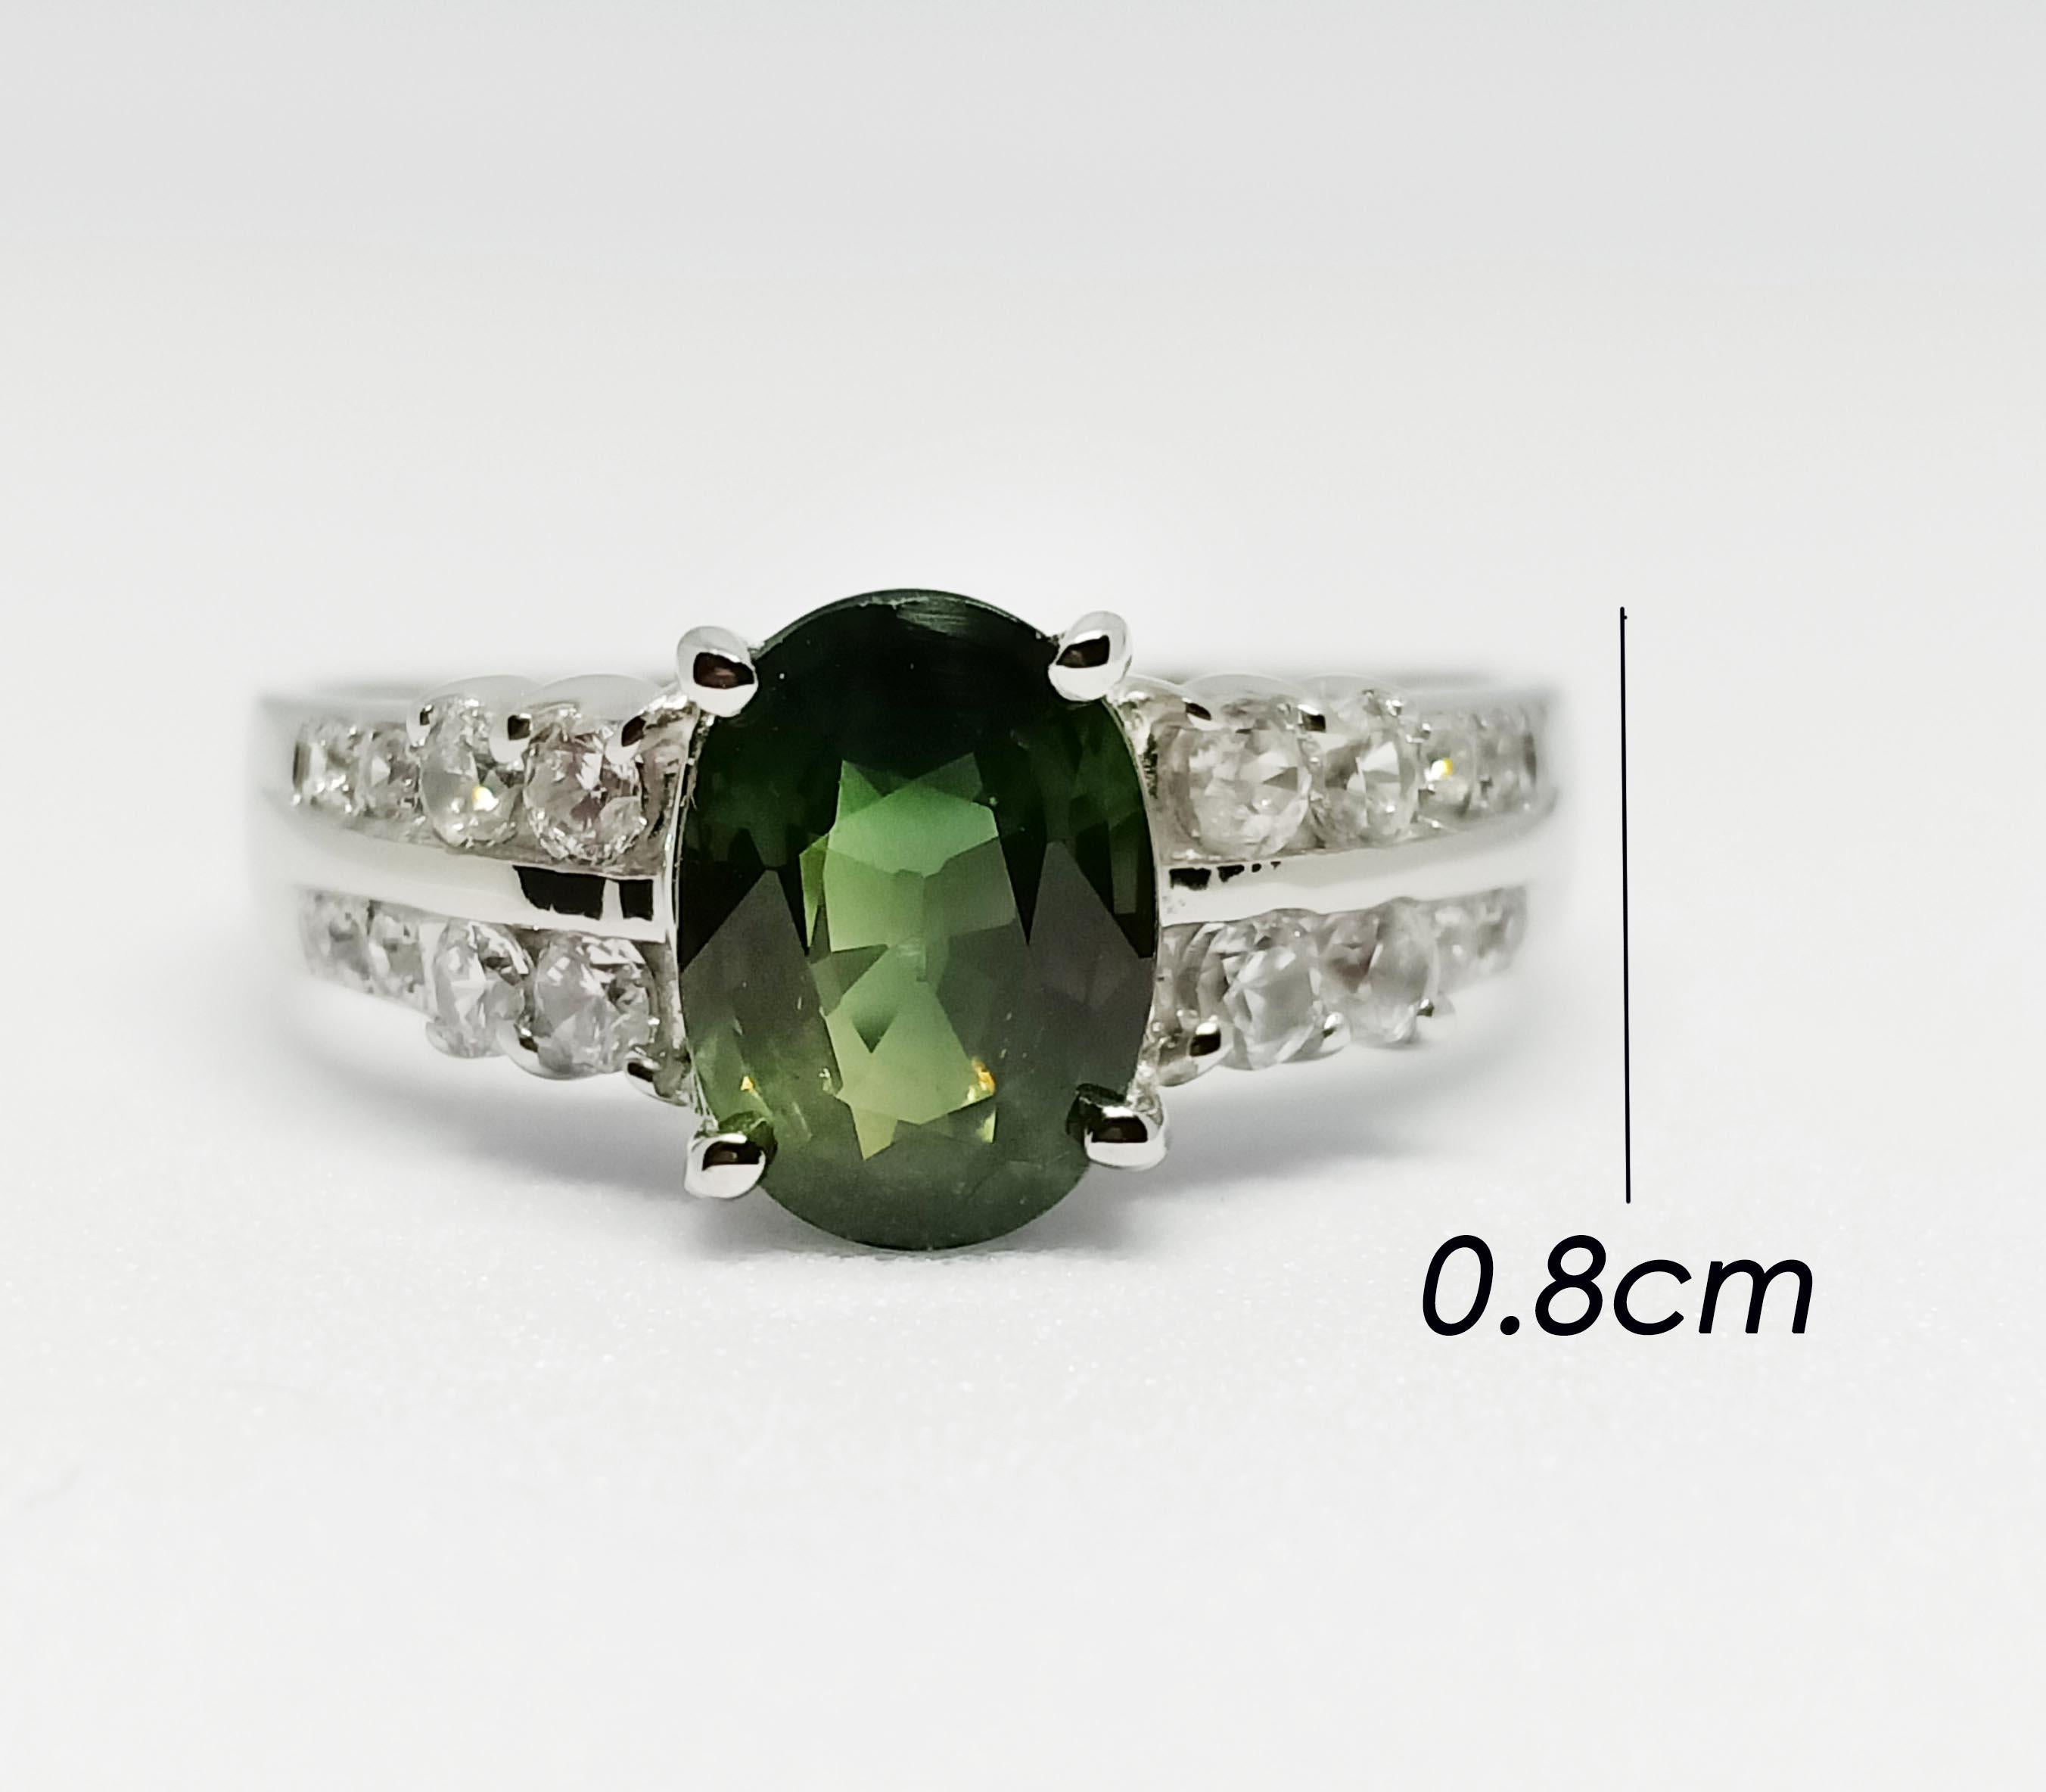 Green sapphire (Only Heated) Oval size. 8x6 mm. 1.65 cts
White zircon 2 mm. 8 pcs.
White zircon 1.25 mm. 8 pcs.
18k white gold plated over sterling silver. 

Can be smaller resizable free. take up 7 days before ship.